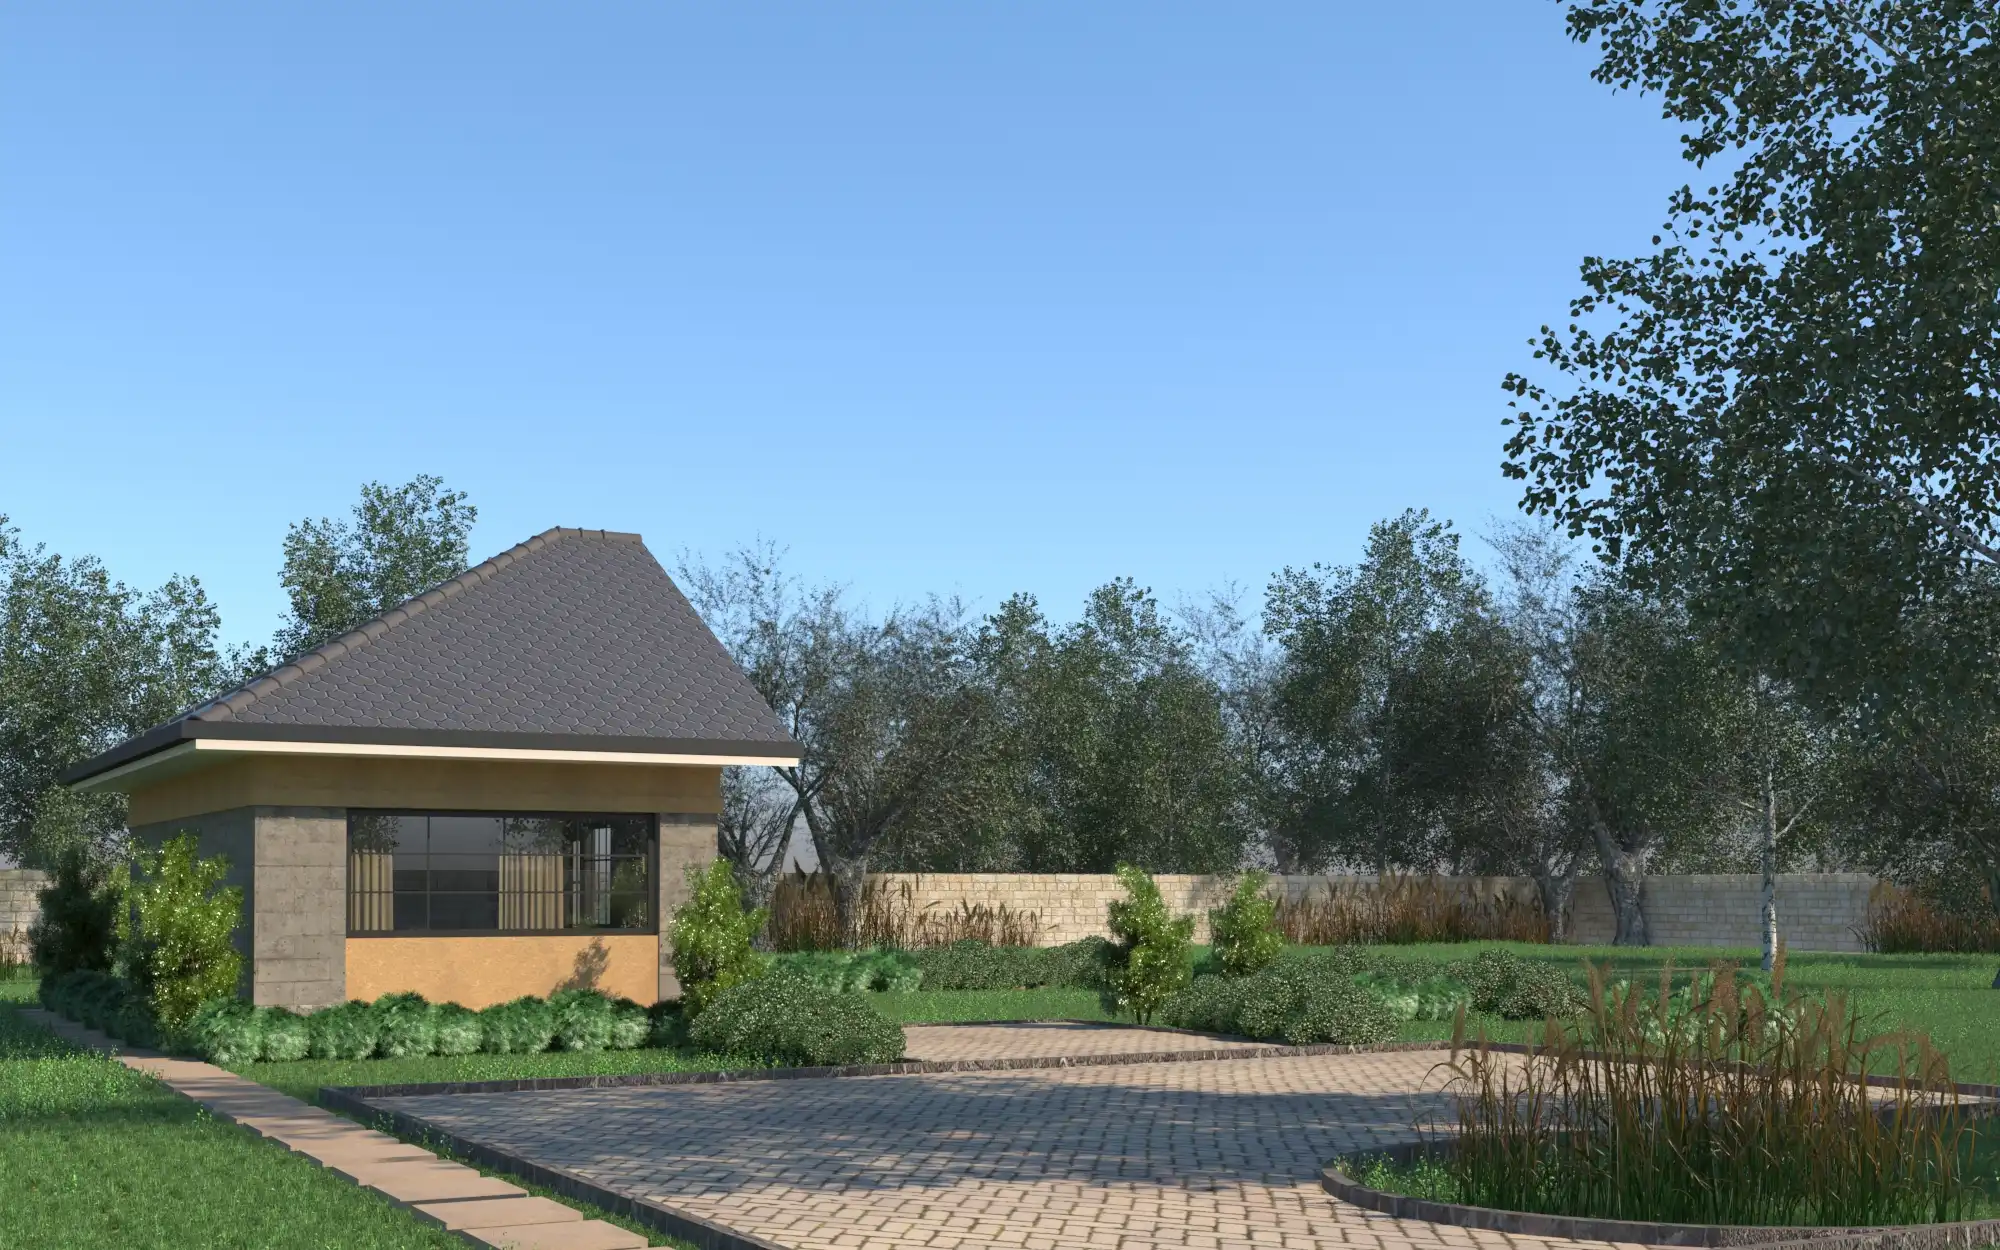 3 Bedroom Bungalow - ID 31101 - Phase 1- Front from Inuua Tujenge house plans with 3 bedrooms and 2 bathrooms. ( jengapolepole )